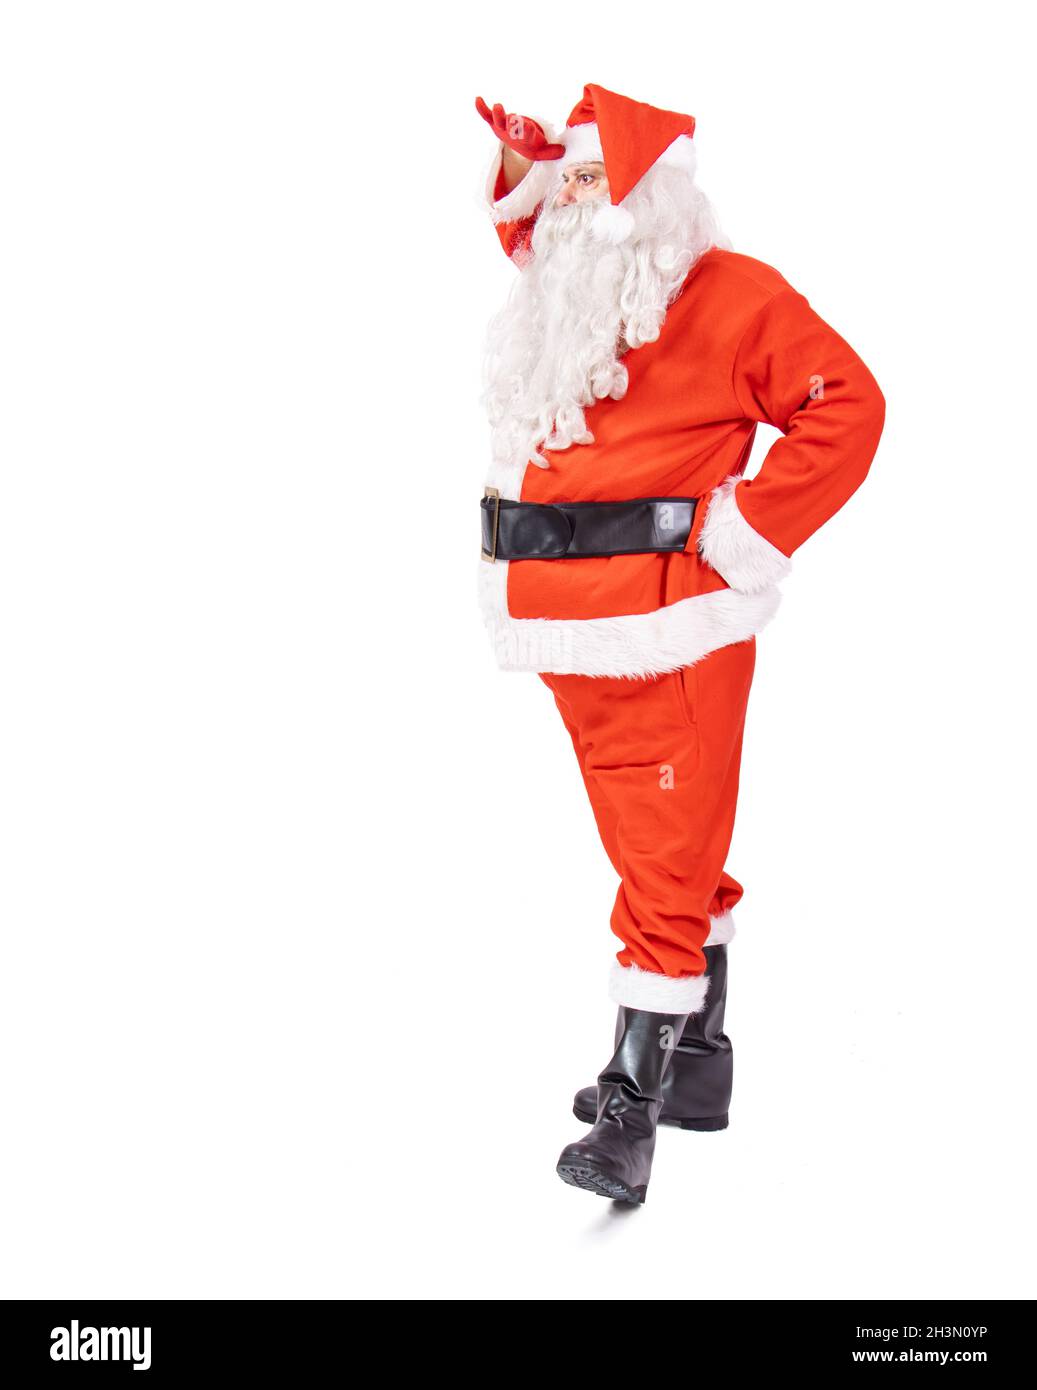 Santa Claus looking into the distance, isolated on a white background Stock Photo